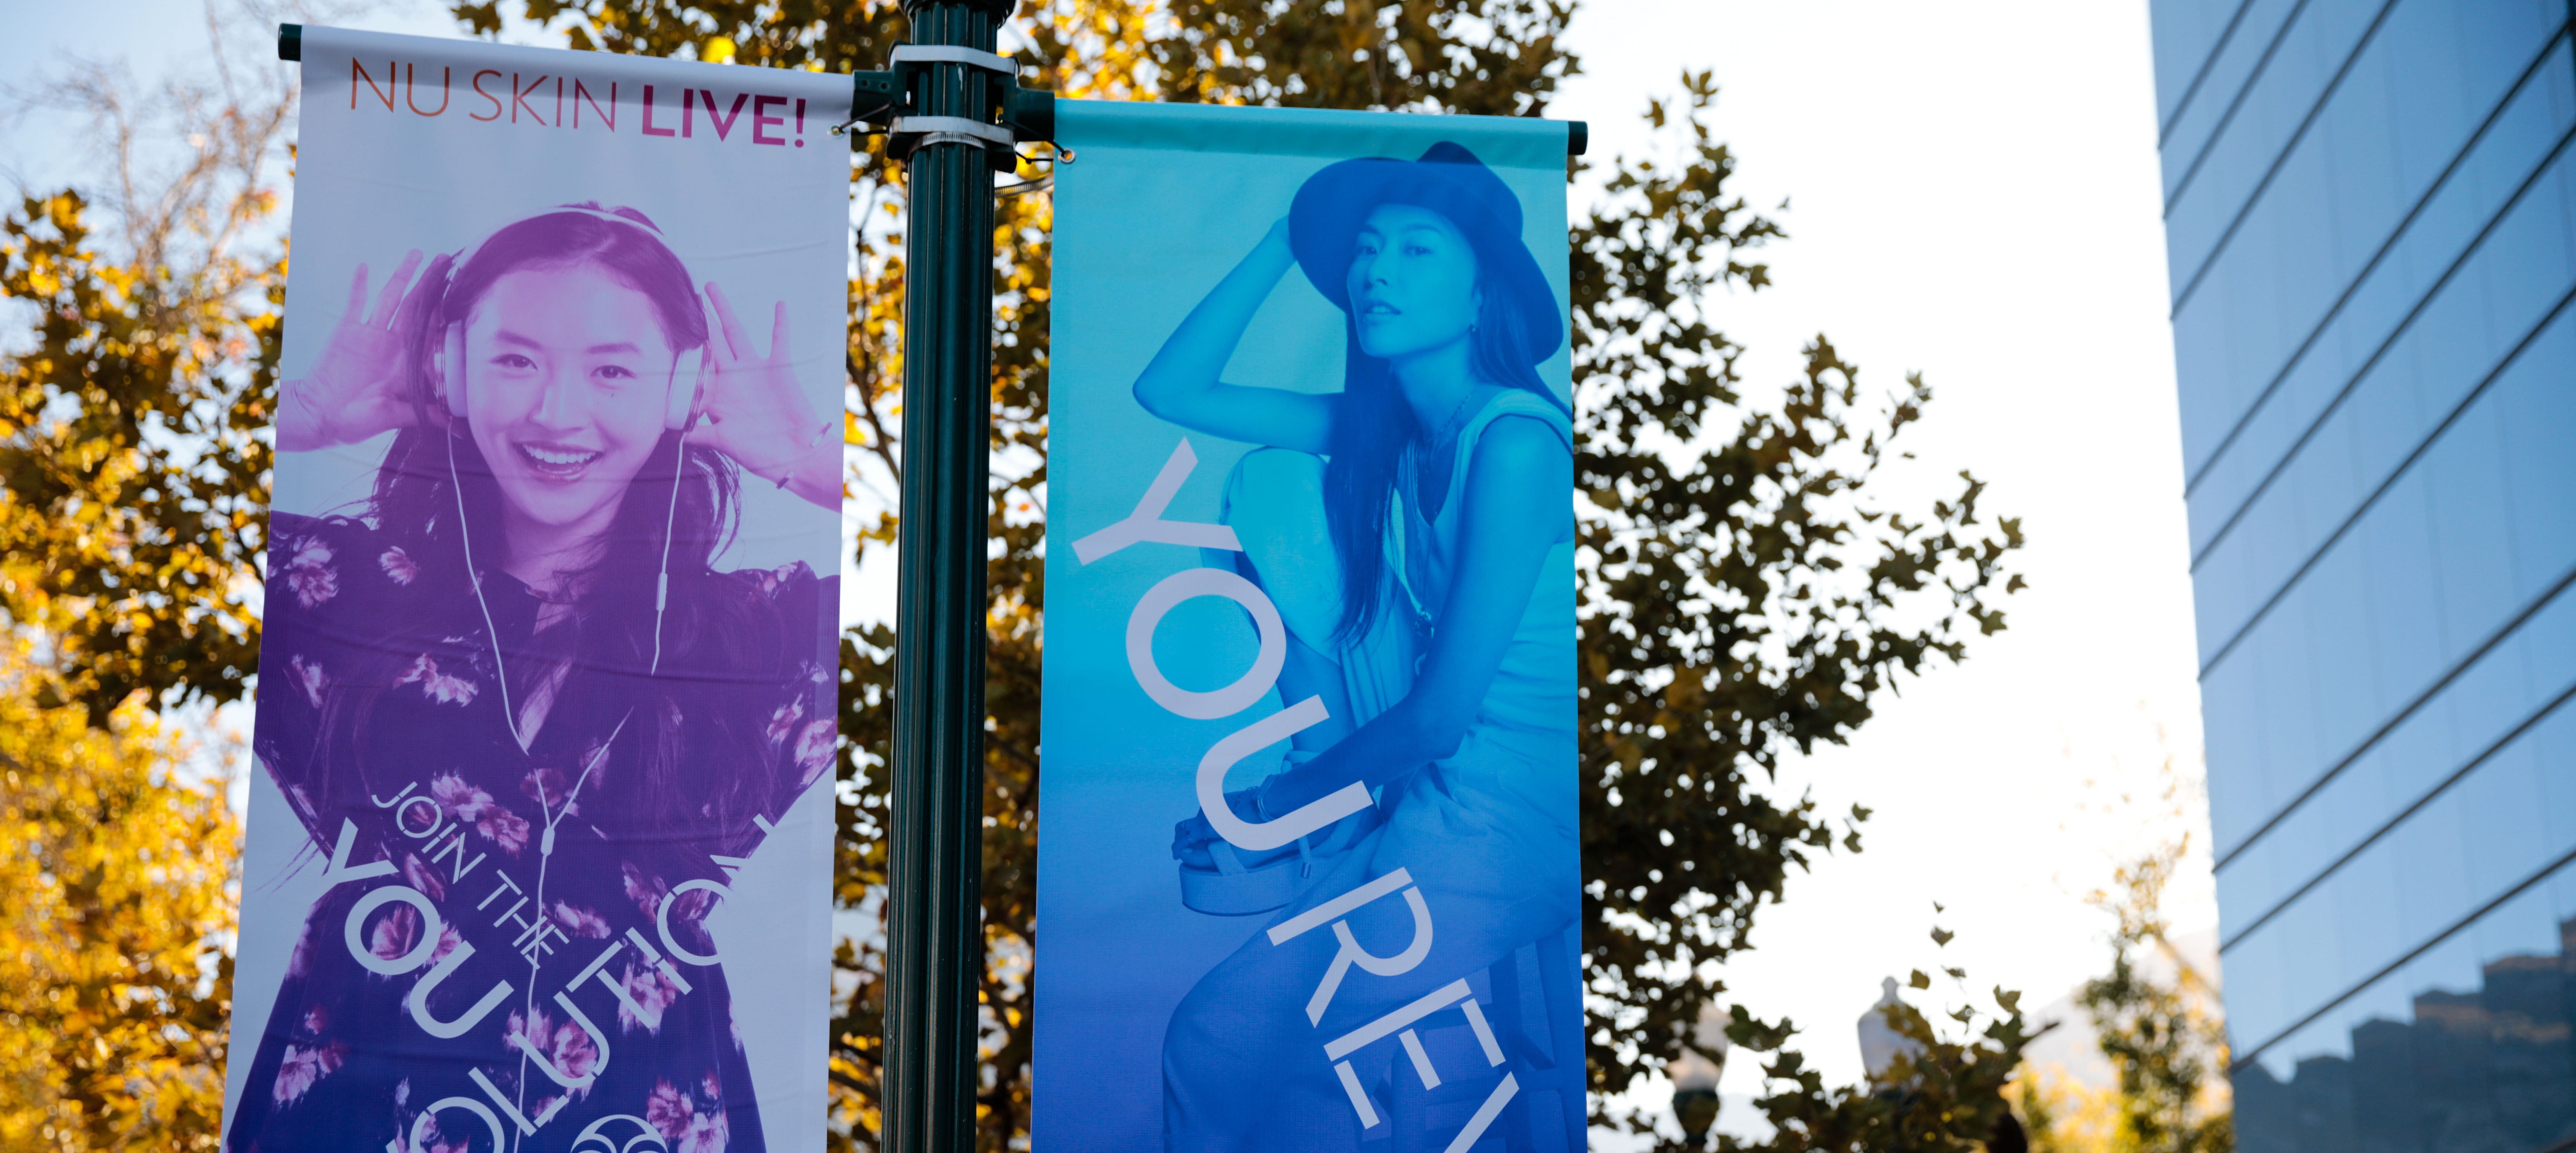 You Revolution banners hang on a light pole in front of the Nu Skin corporate office in Provo, Utah.